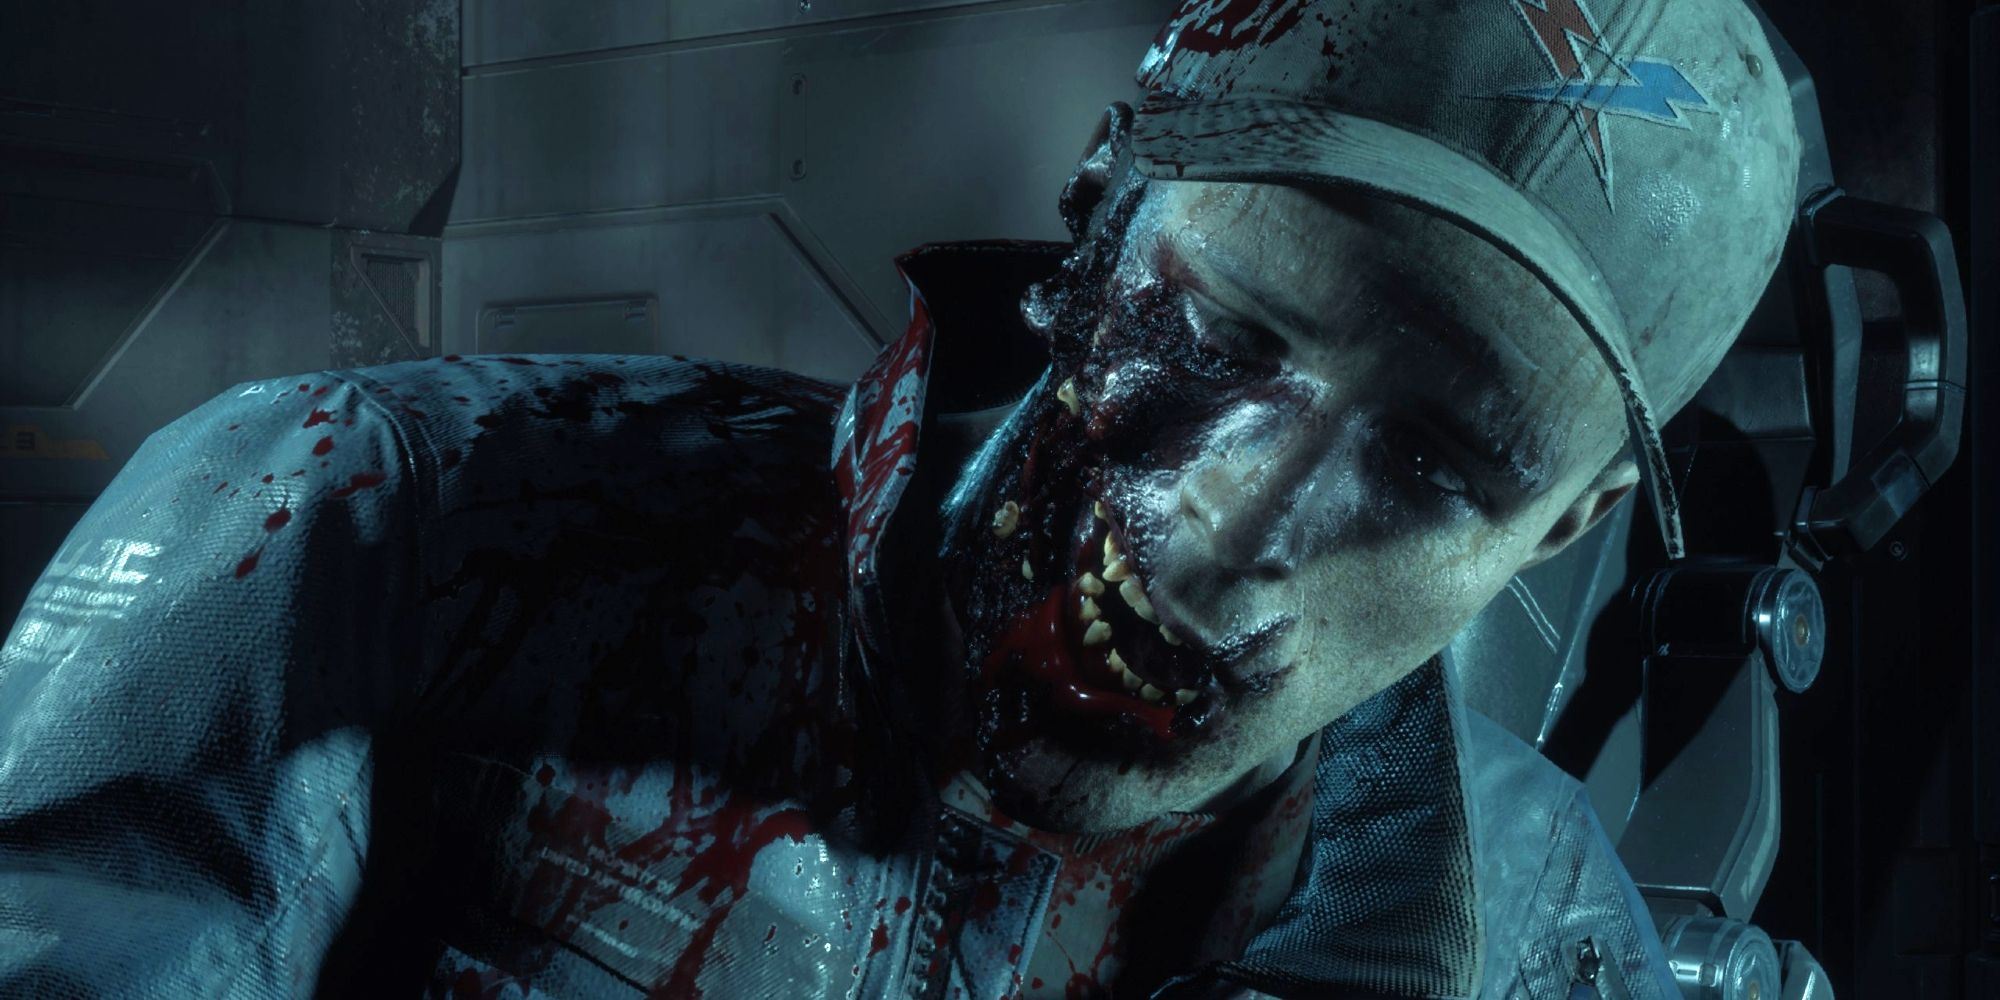 Image of the gory face of Max, Jacob's co-pilot.